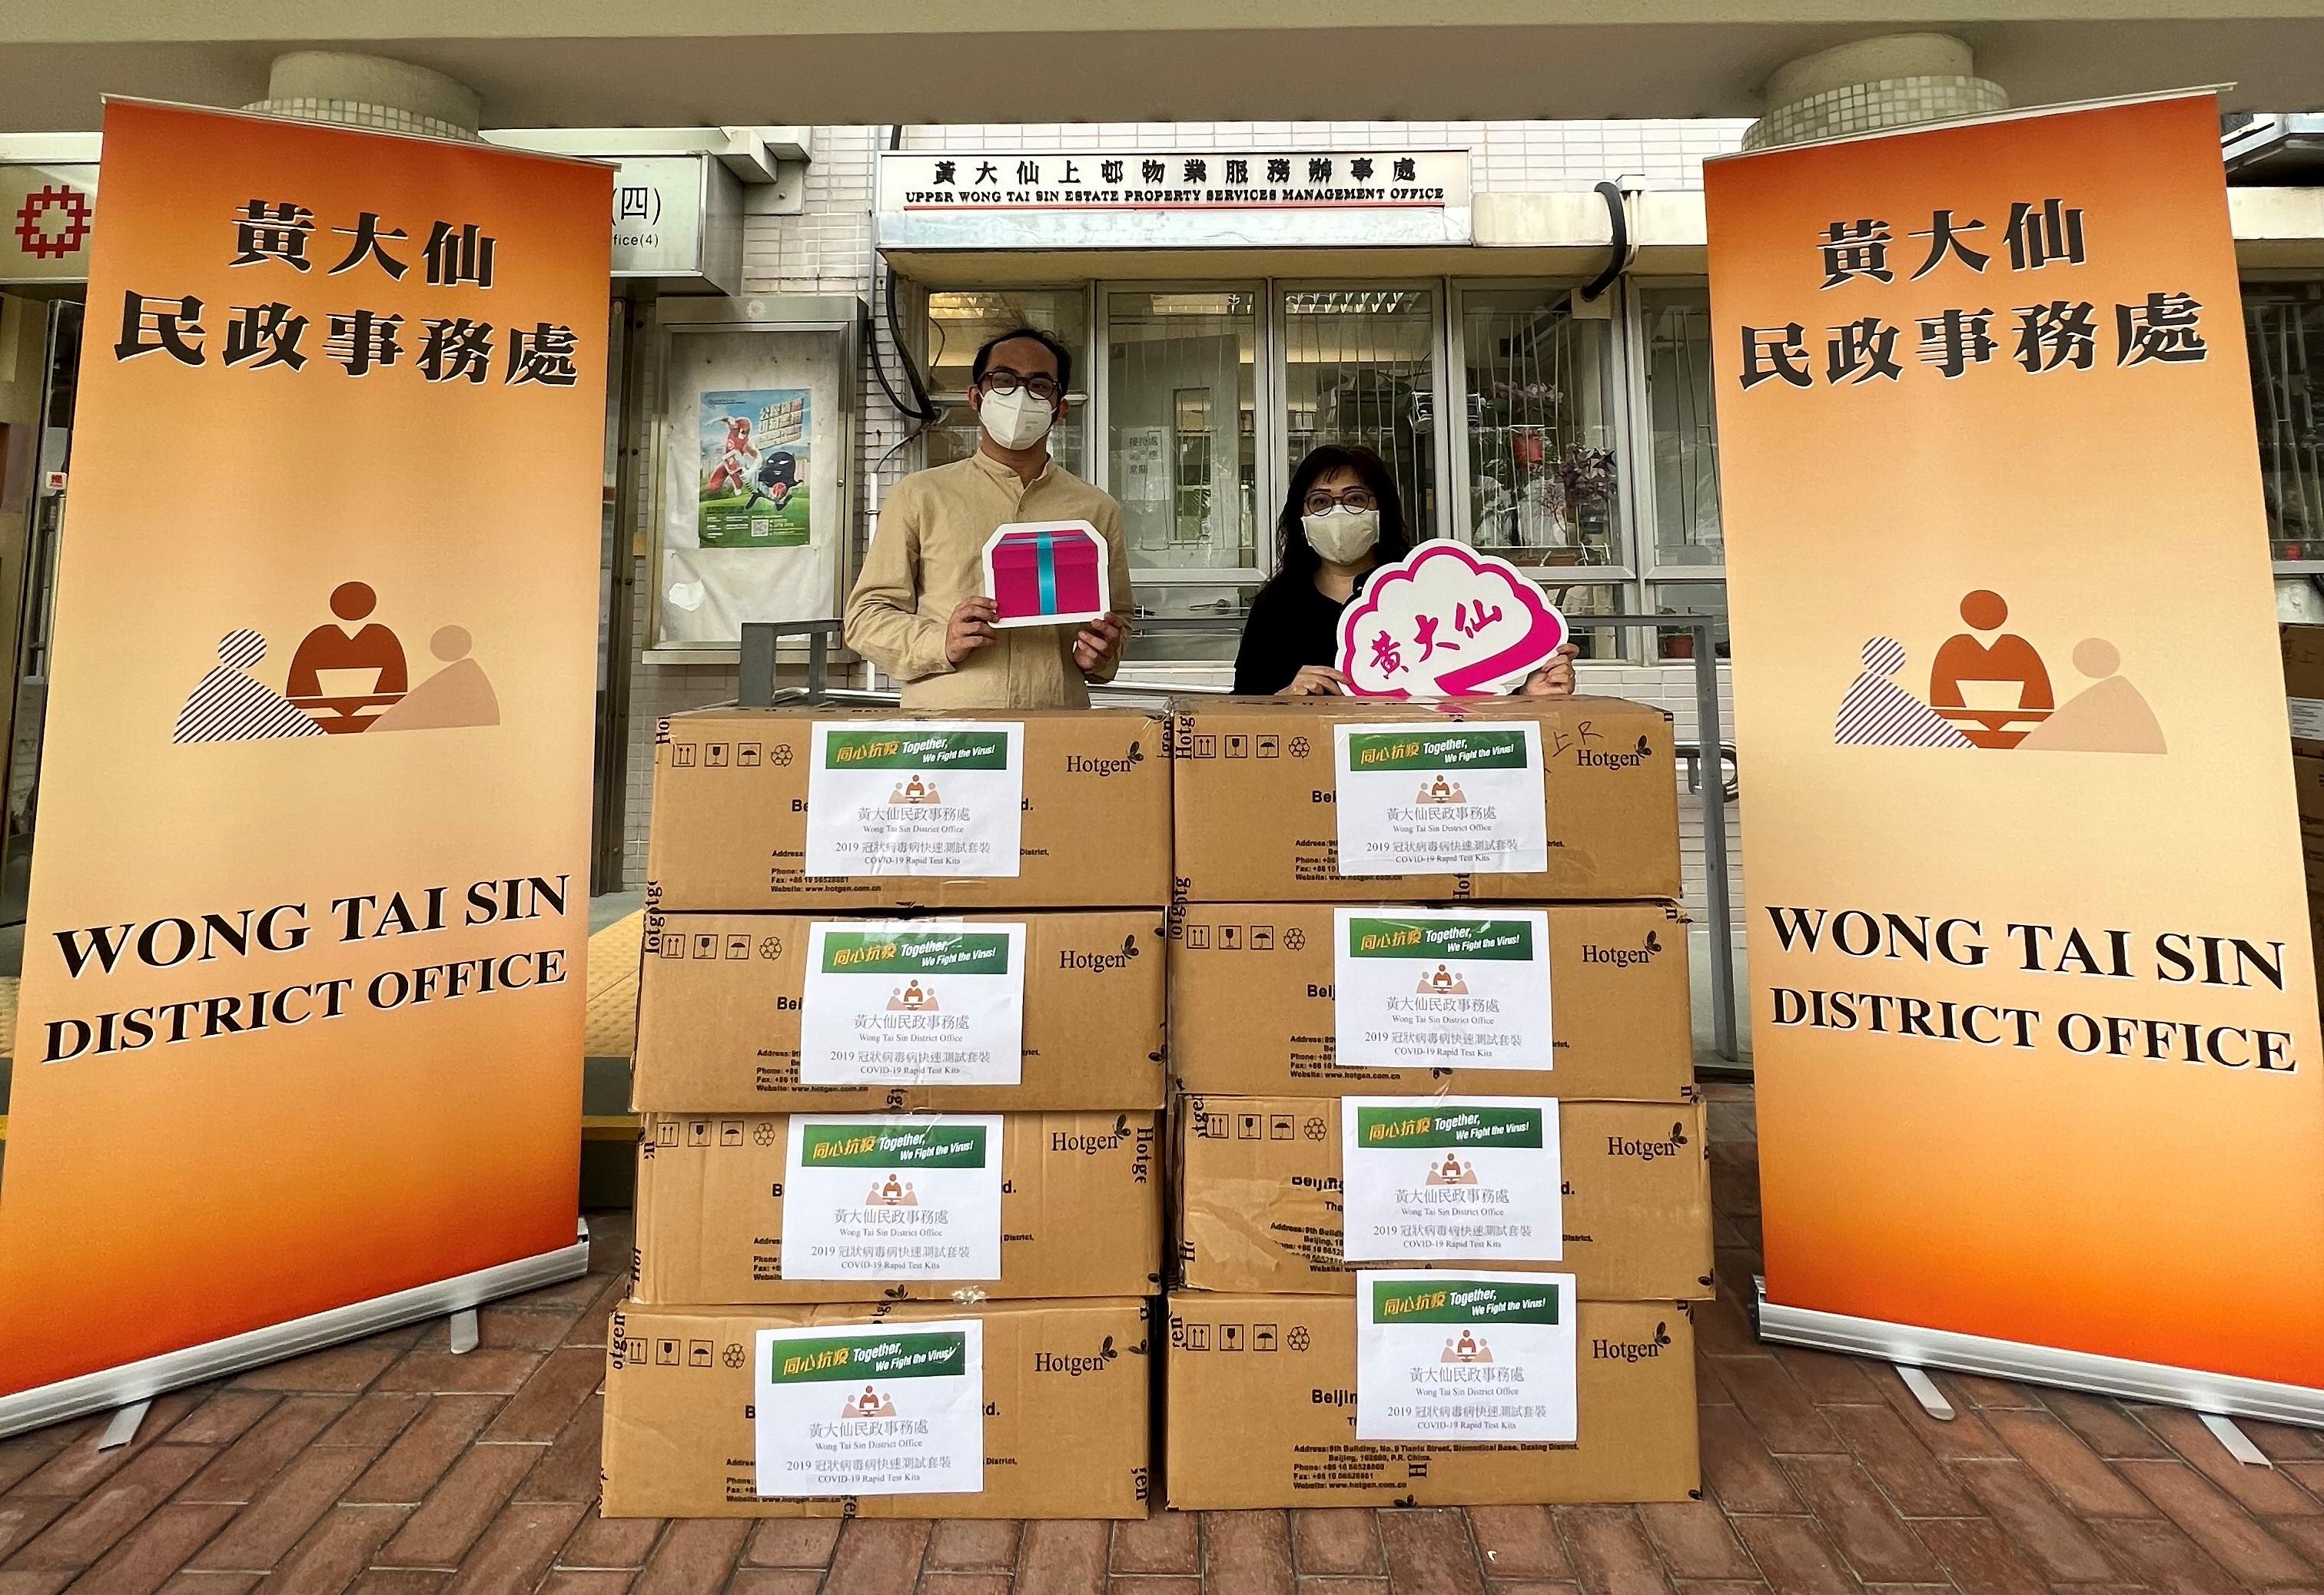 The Wong Tai Sin District Office today (March 16) distributed COVID-19 rapid test kits to households, cleansing workers and property management staff living and working in Upper Wong Tai Sin Estate for voluntary testing through the Housing Department.